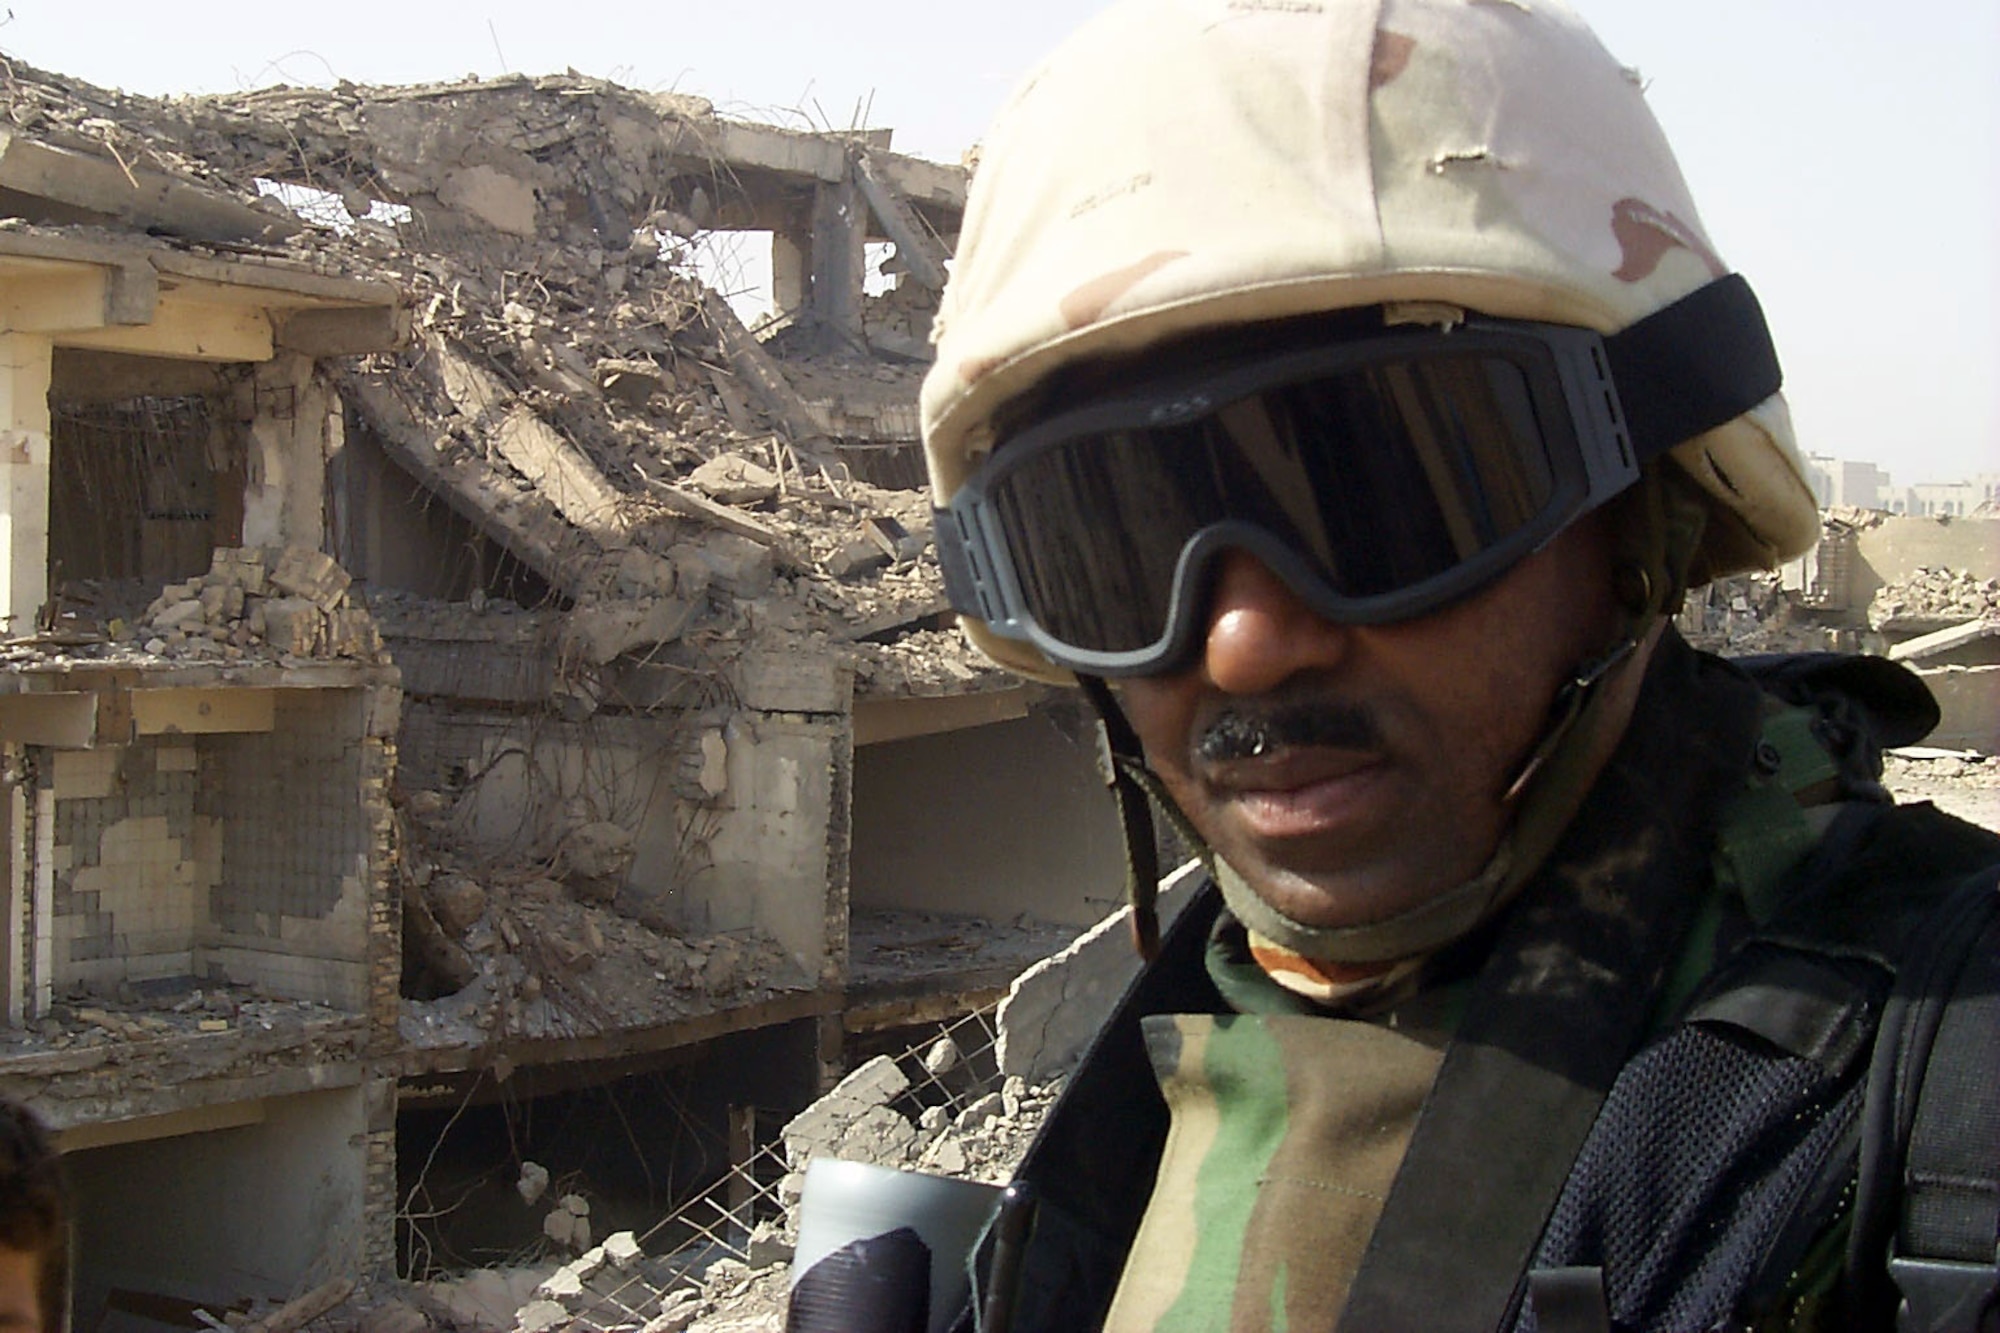 BAGHDAD, Iraq -- Master Sgt. Michael Best stands amidst the rubble of what was formerly the Iraqi Ministry of Defense complex here.  Best is a combat-camera photographer deployed from Charleston Air Force Base, S.C.  (U.S. Air Force photo by Capt. Roger Burdette)